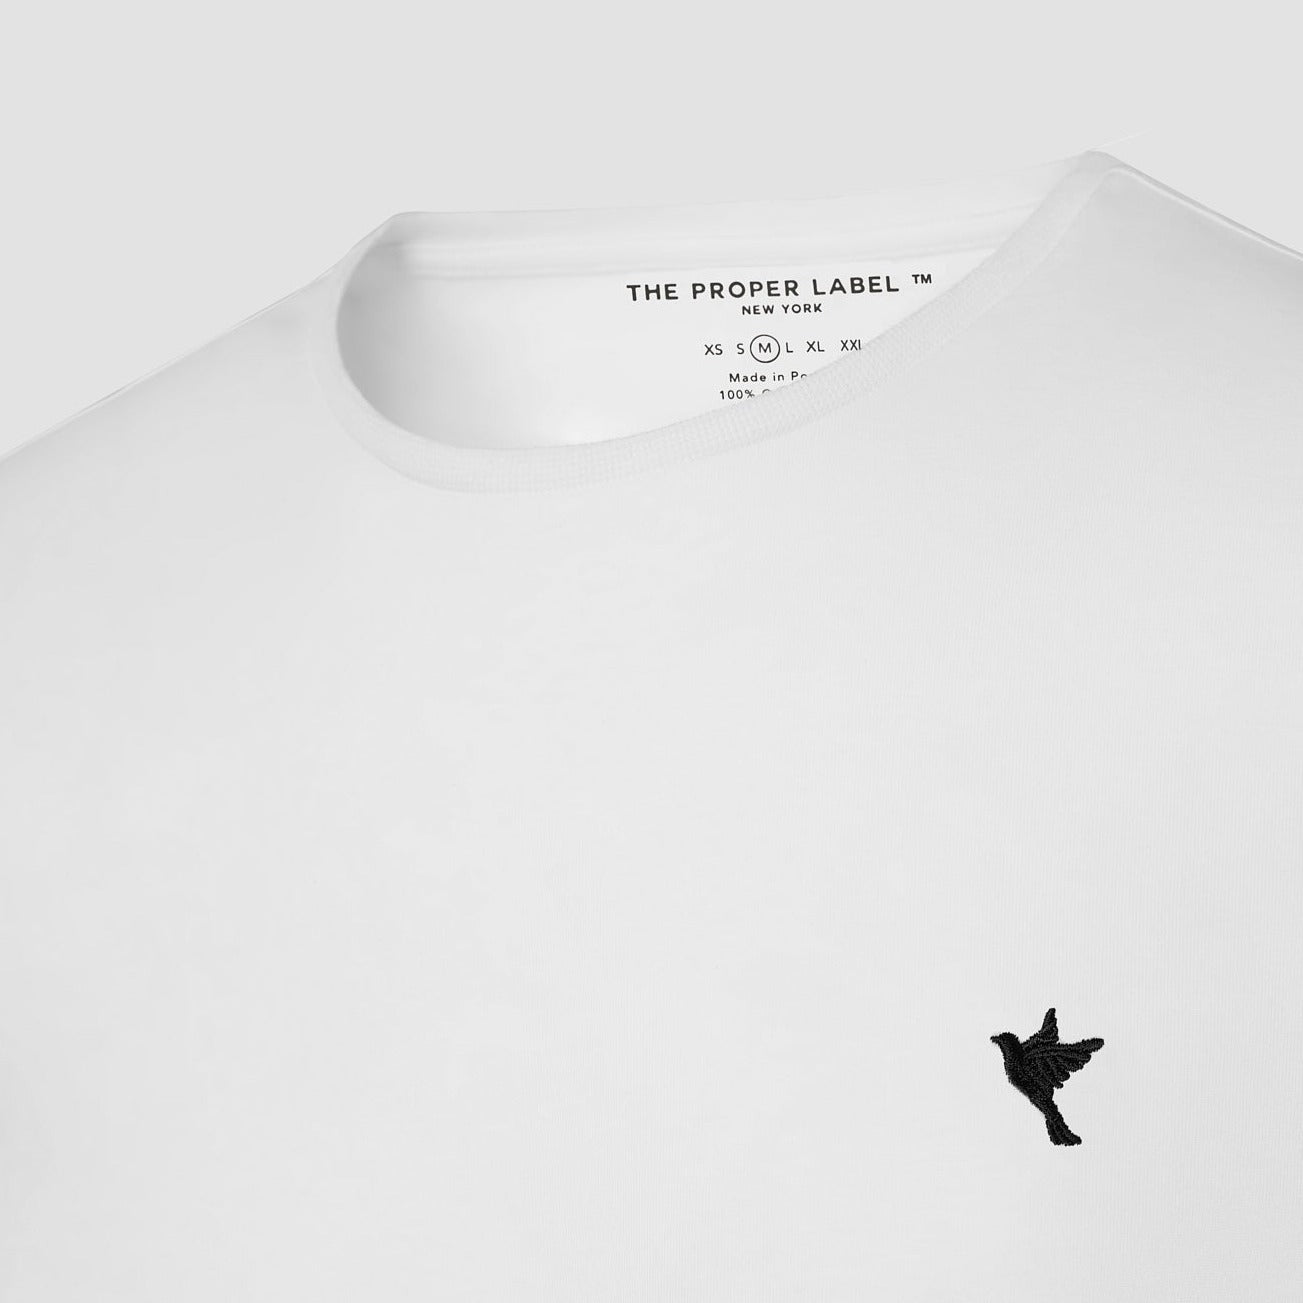 The Proper Tee Shirt ™ [Black Dove Embroidery] - The Proper Label ®